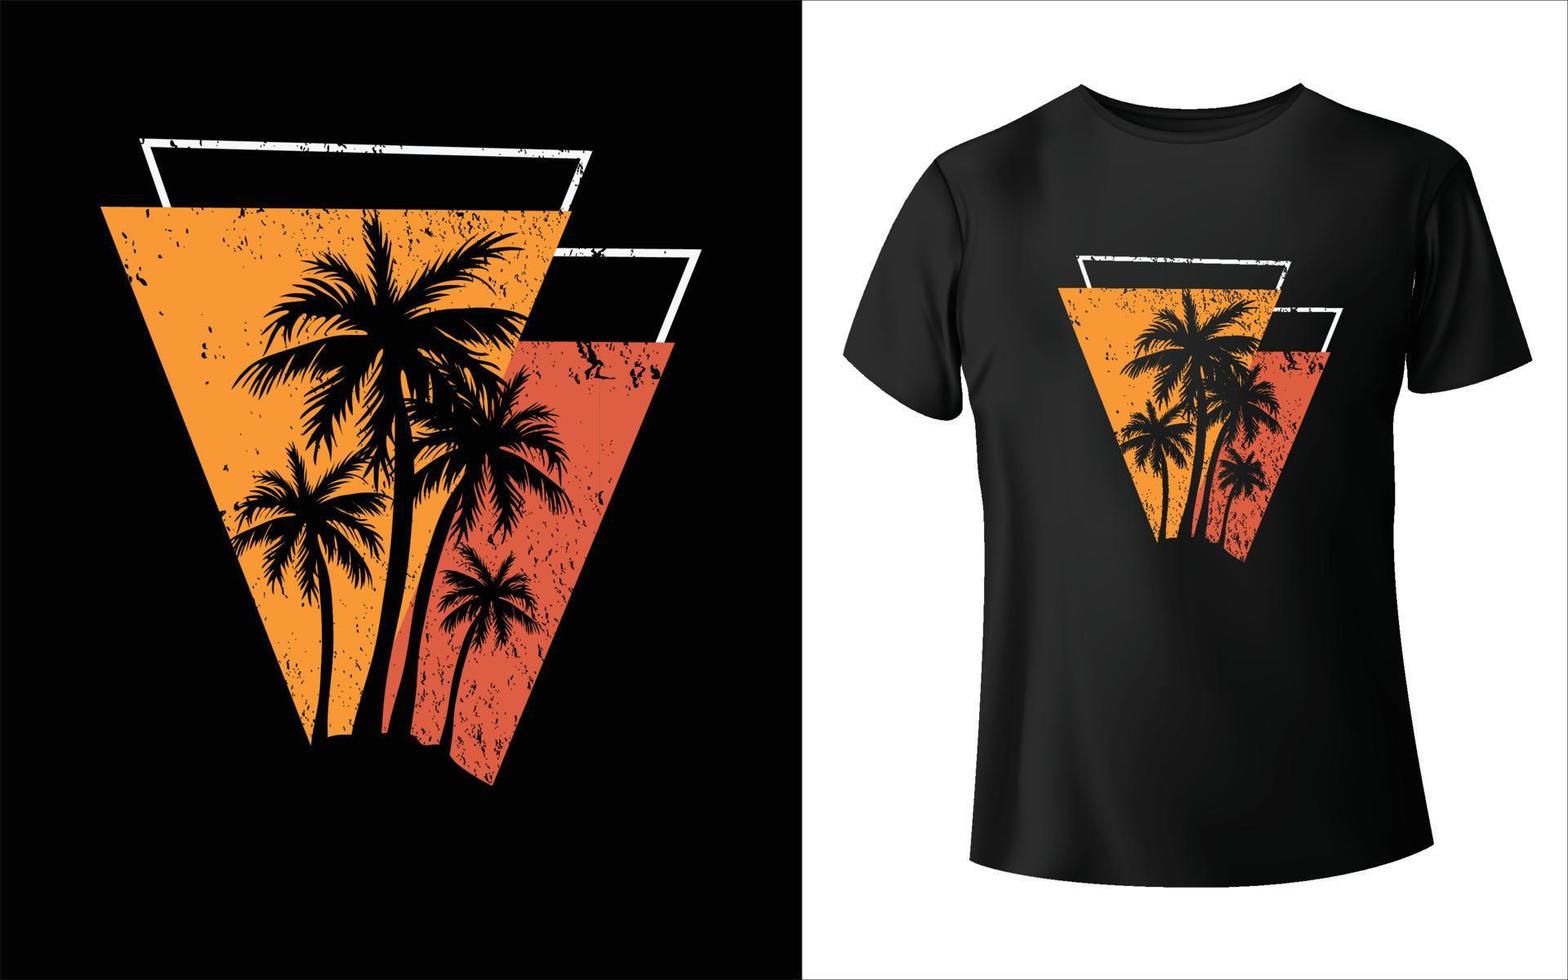 California Ocean side stylish t-shirt and apparel trendy design with palm trees silhouettes, typography, print, vector illustration. Global swatches